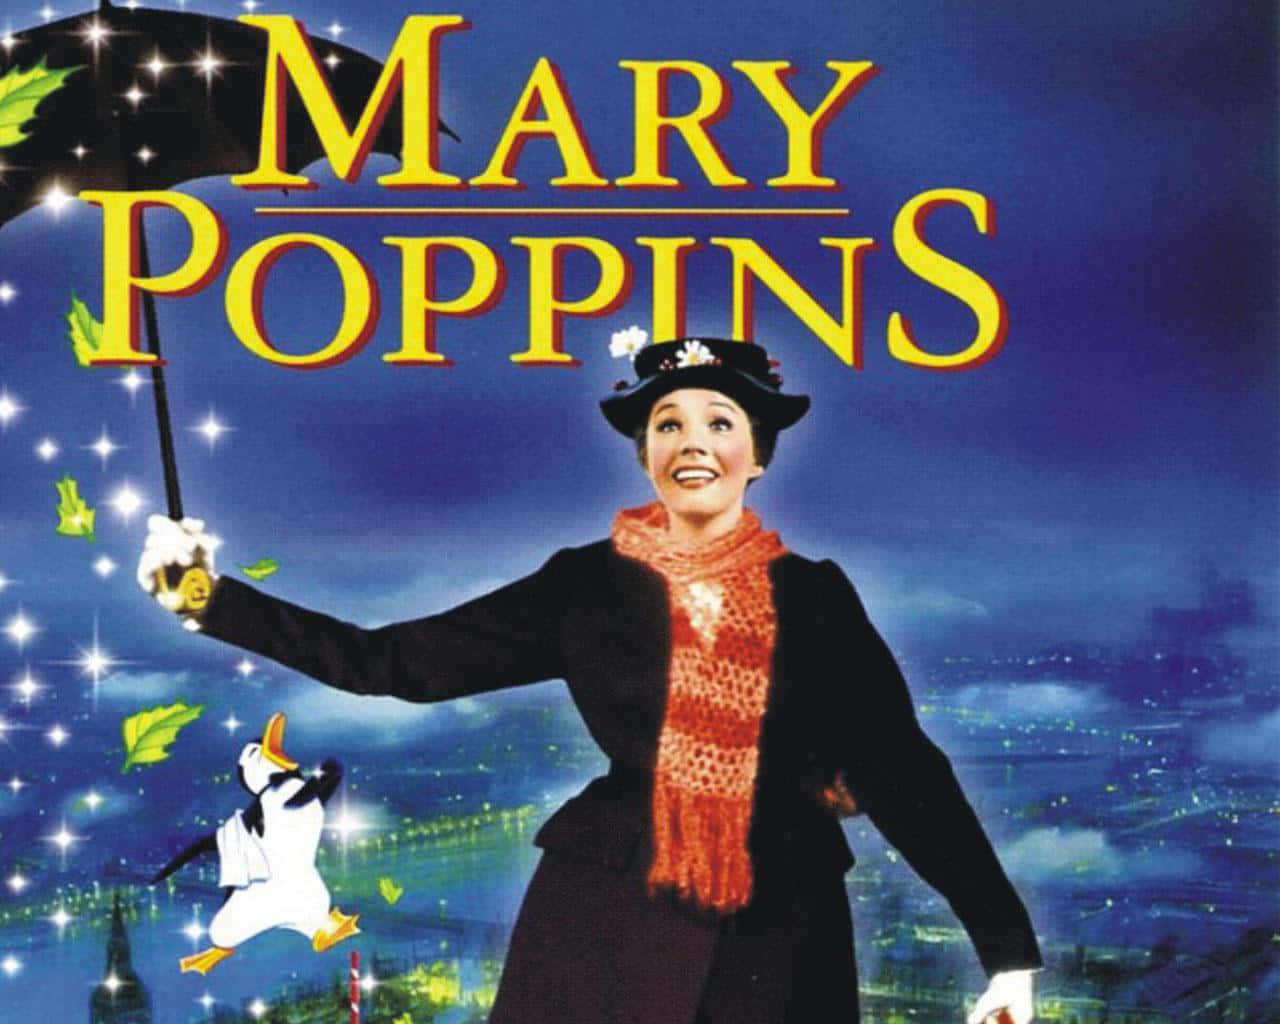 Mary Poppins Soaring High With Umbrella Wallpaper